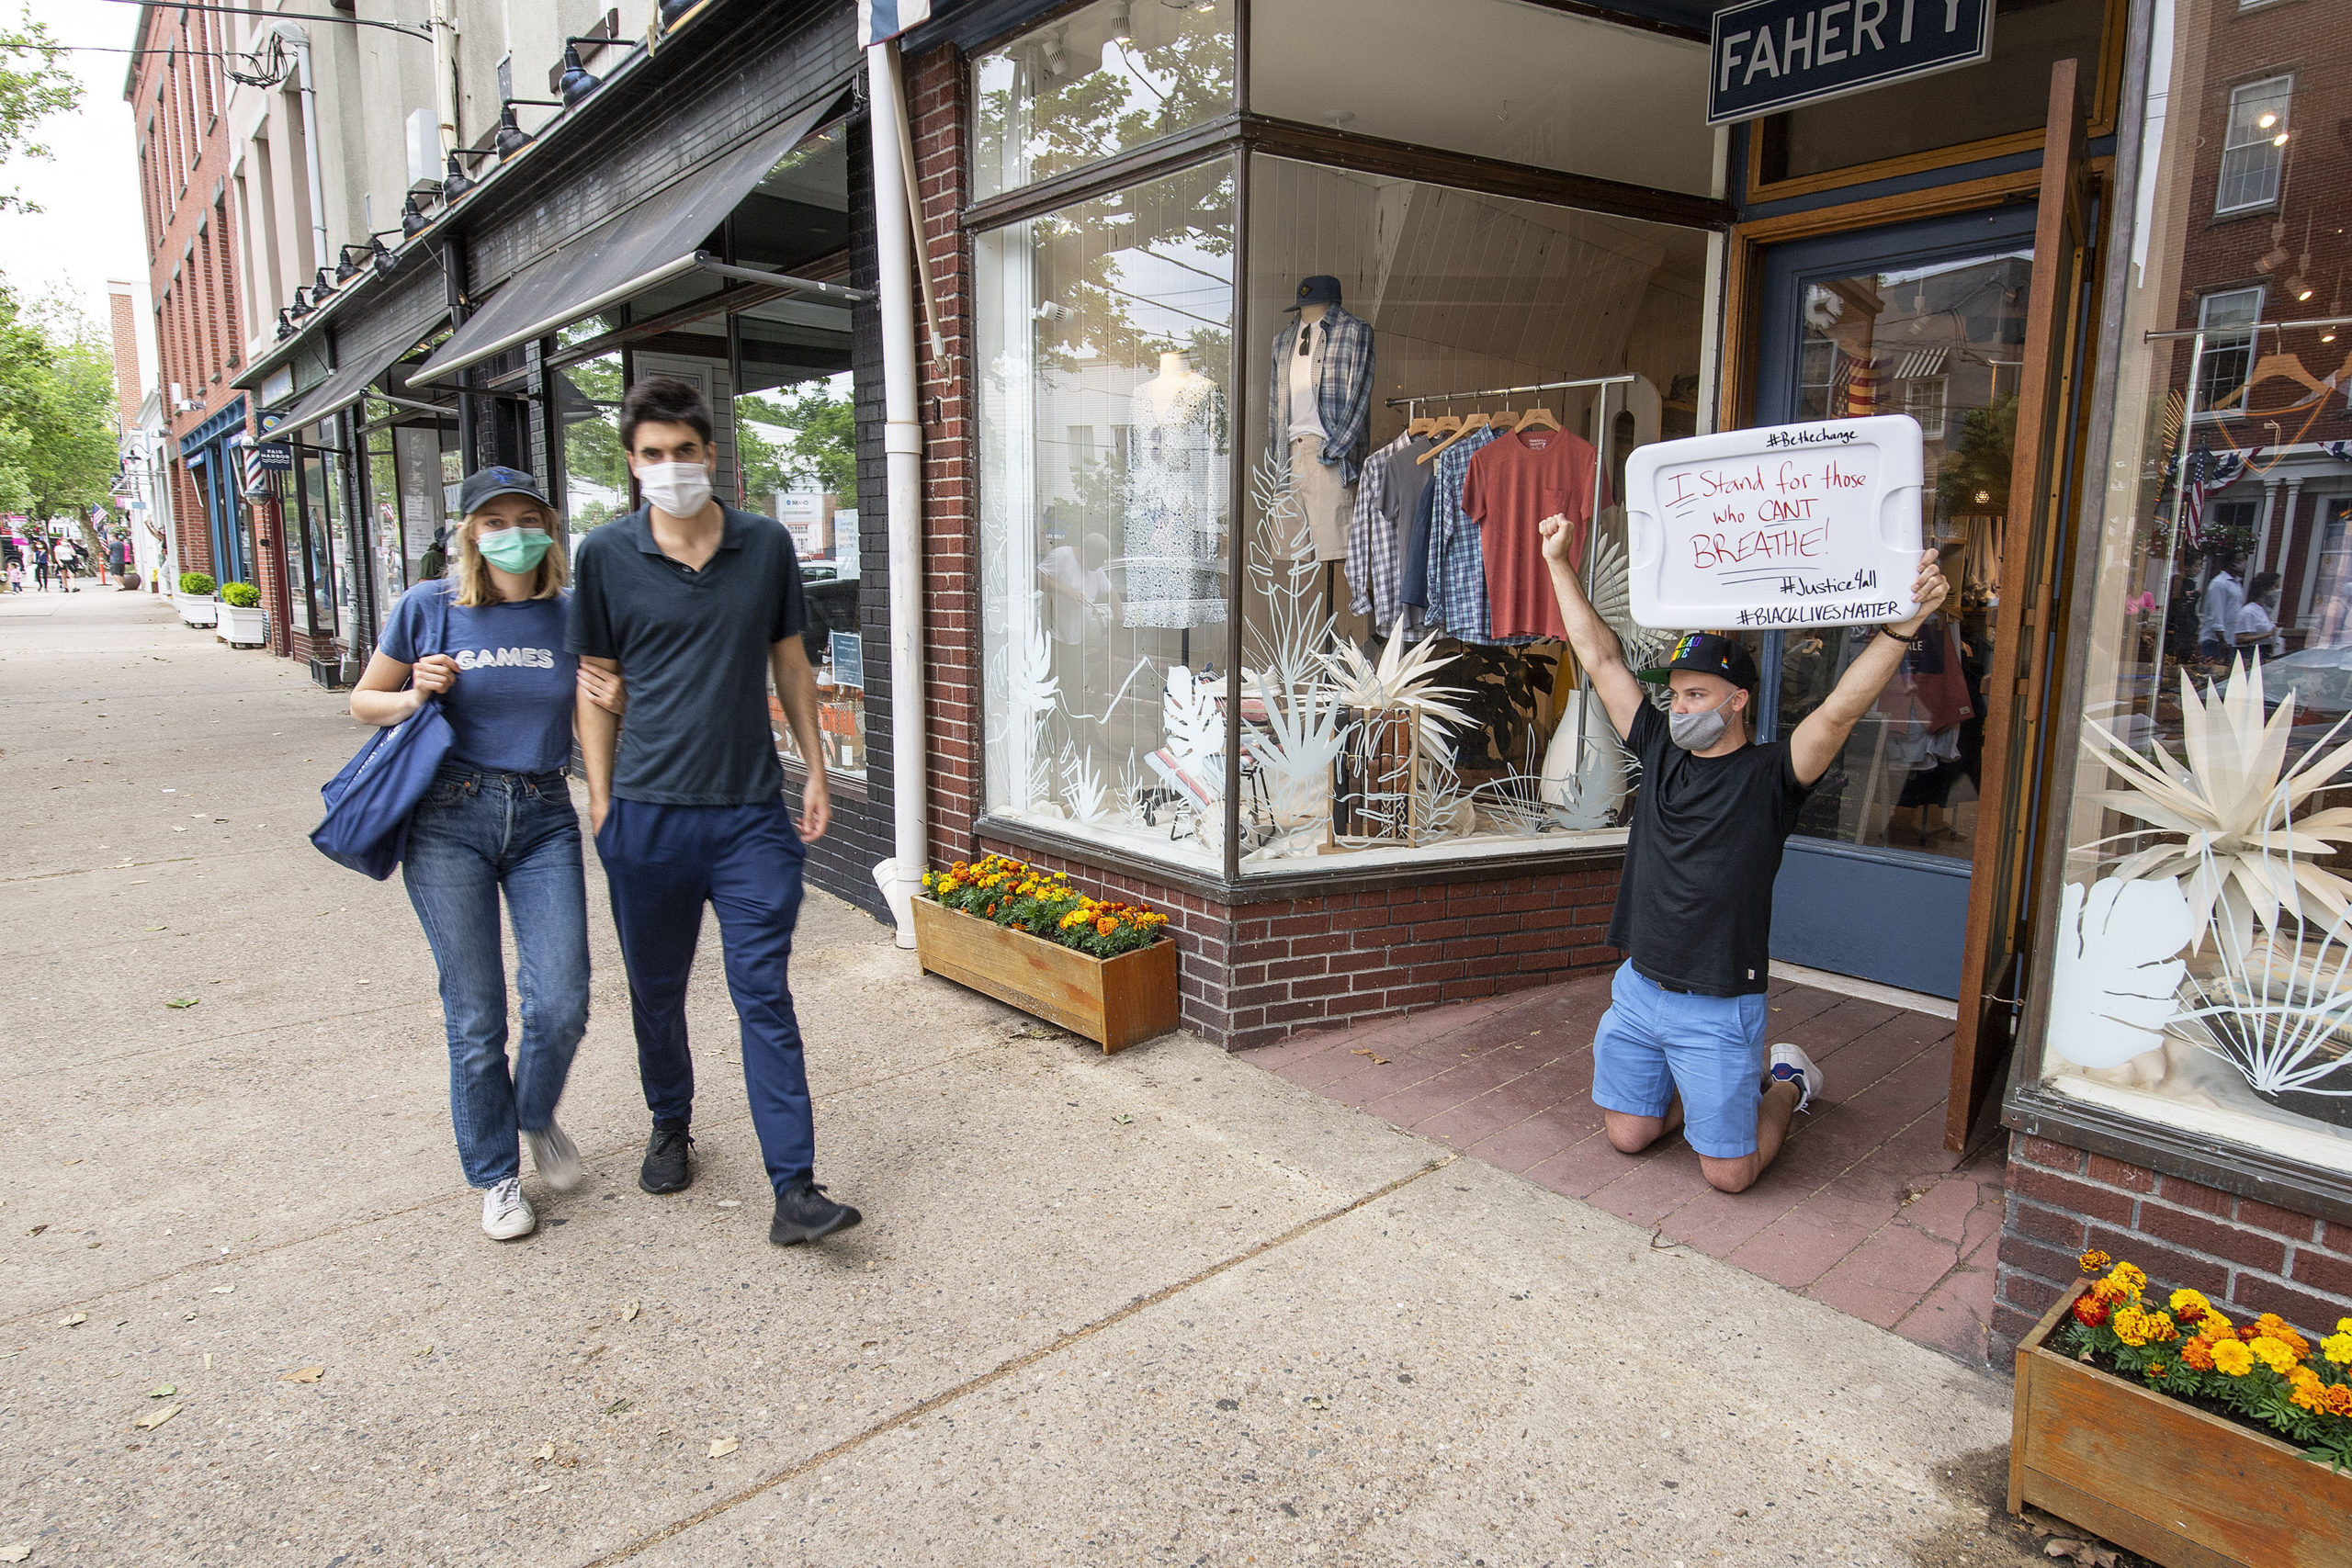 Unable to leave work, Jeremy Impelliveri makes his voice heard from the doorway of the Faherty store as marchers make their way down Main Street during a Black Lives Matter protest rally held in Steinbeck Park on Friday afternoon.    MICHAEL HELLER